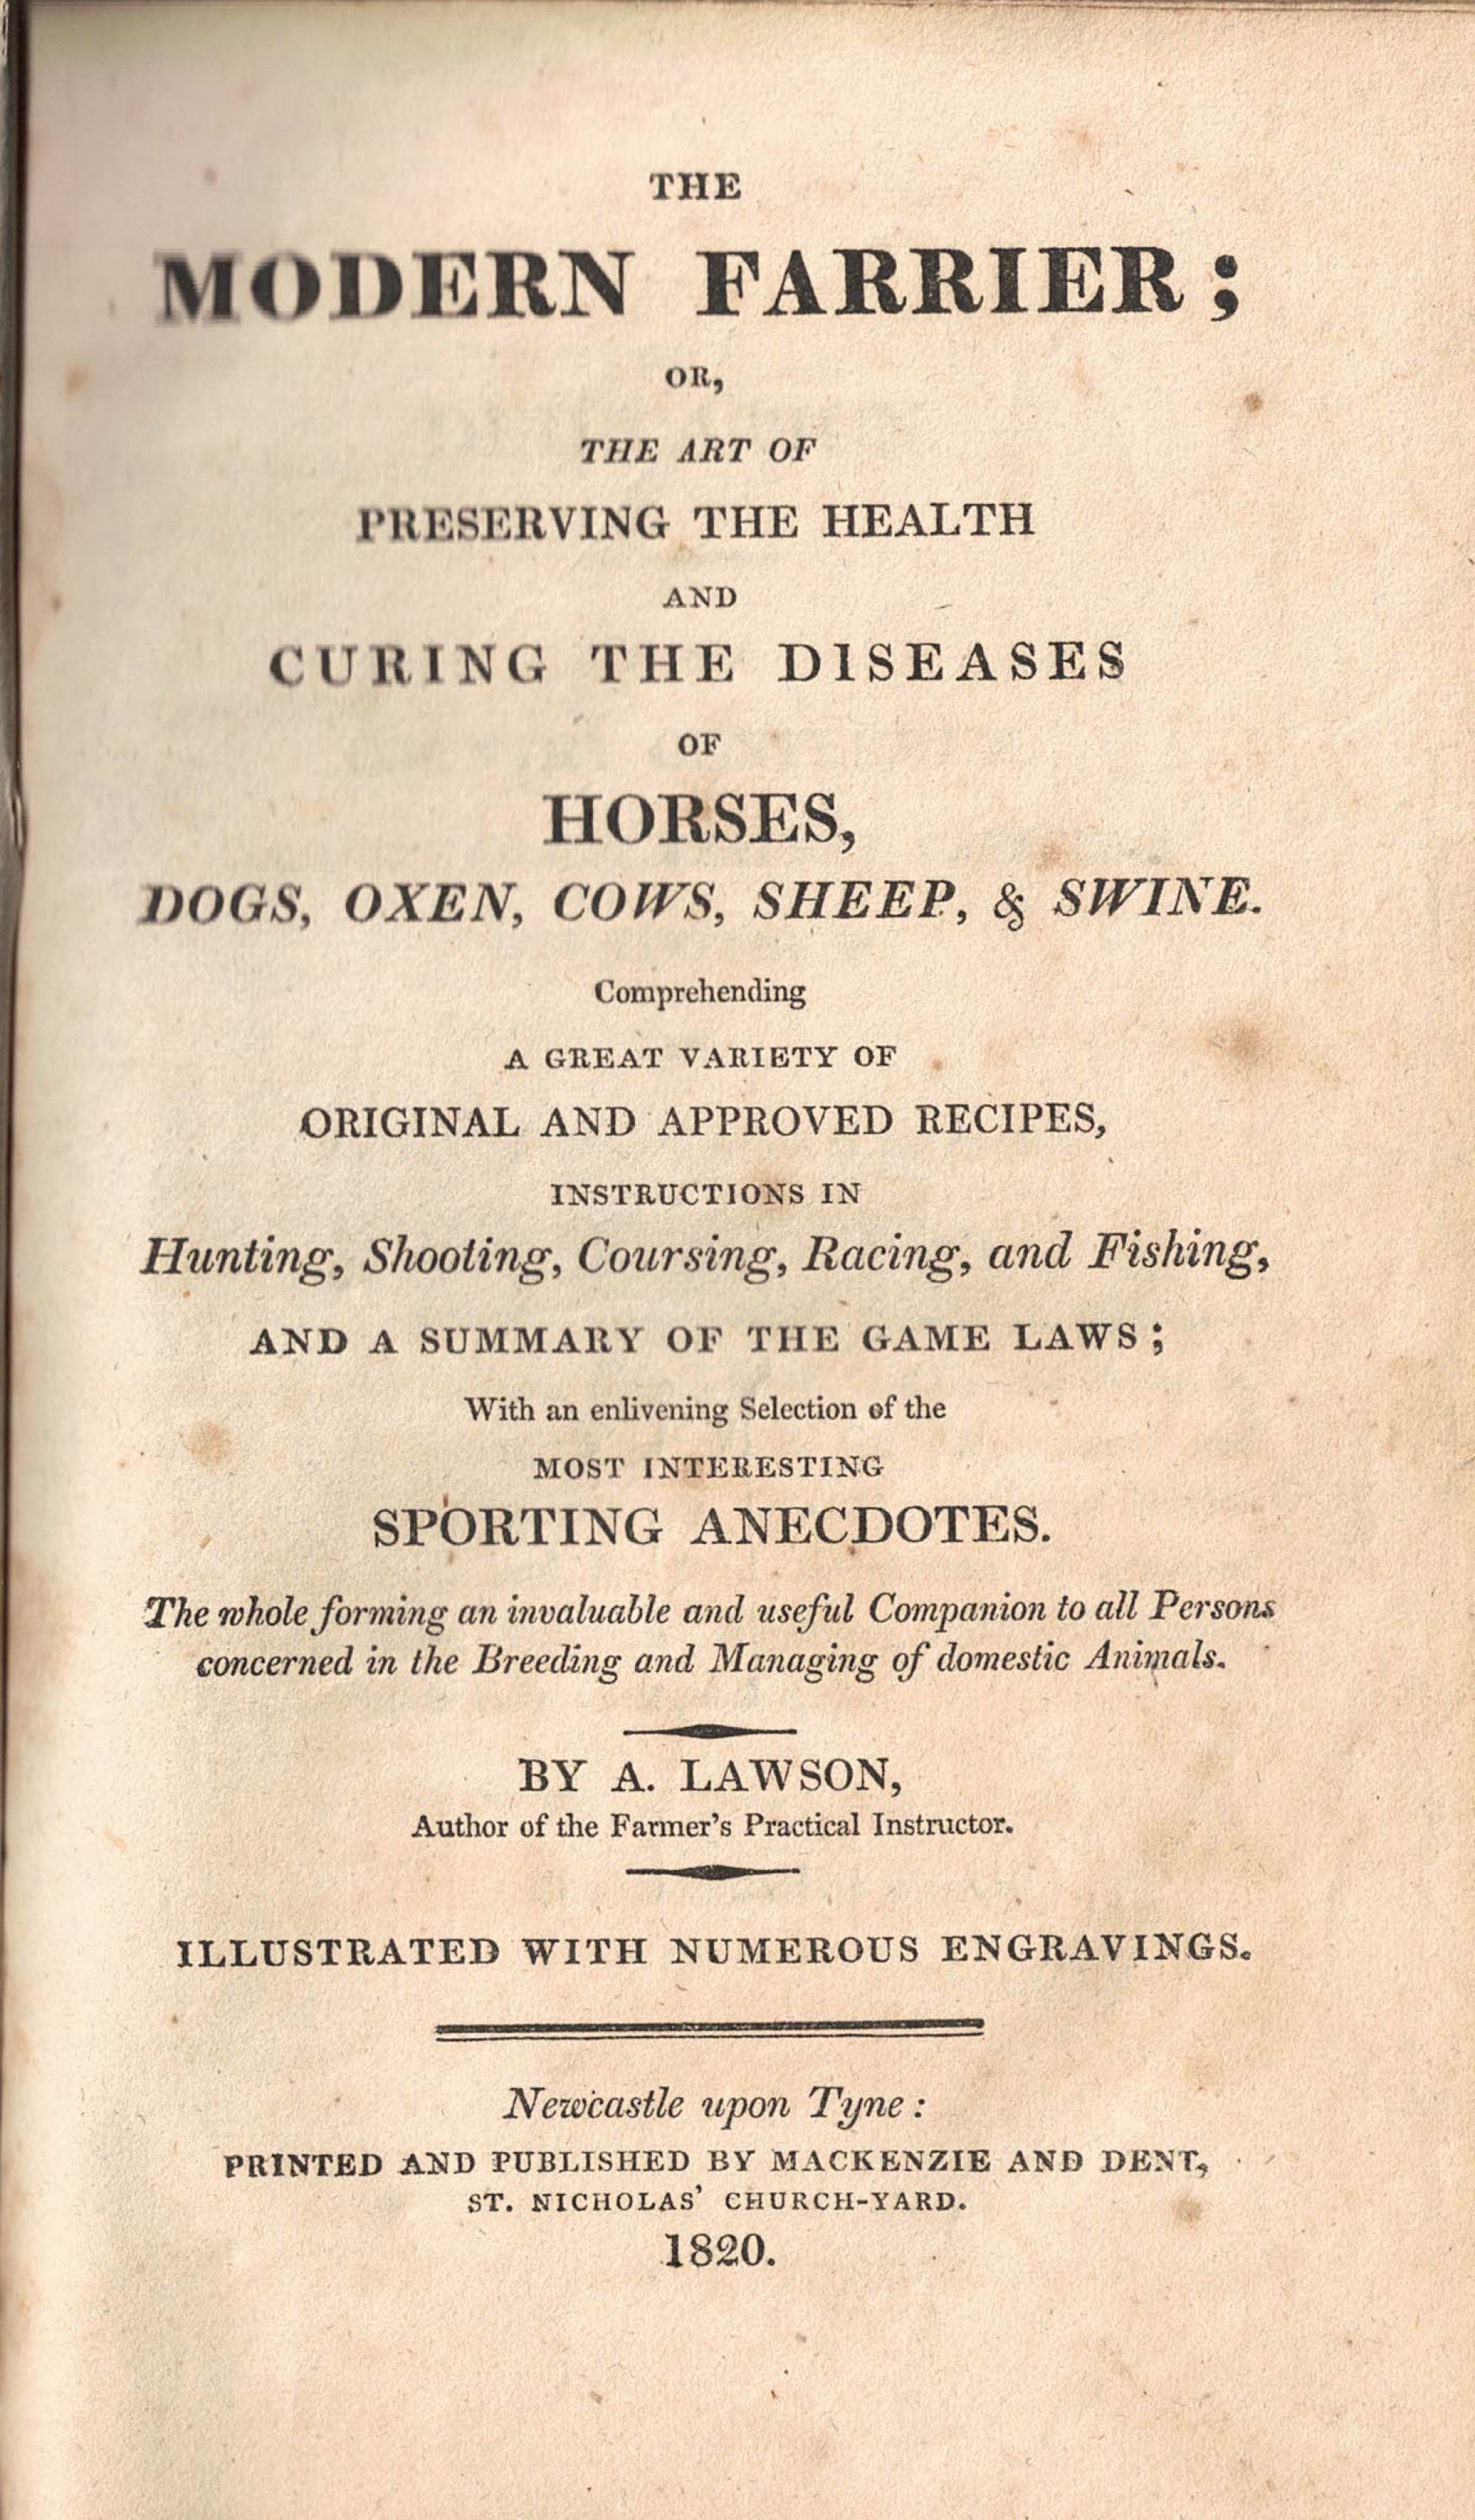 The Modern Farrier, or The Best Mode of Preserving the Health and Curing the Disorders of Domestic Animals with Practical Instruction to Sportsmen.